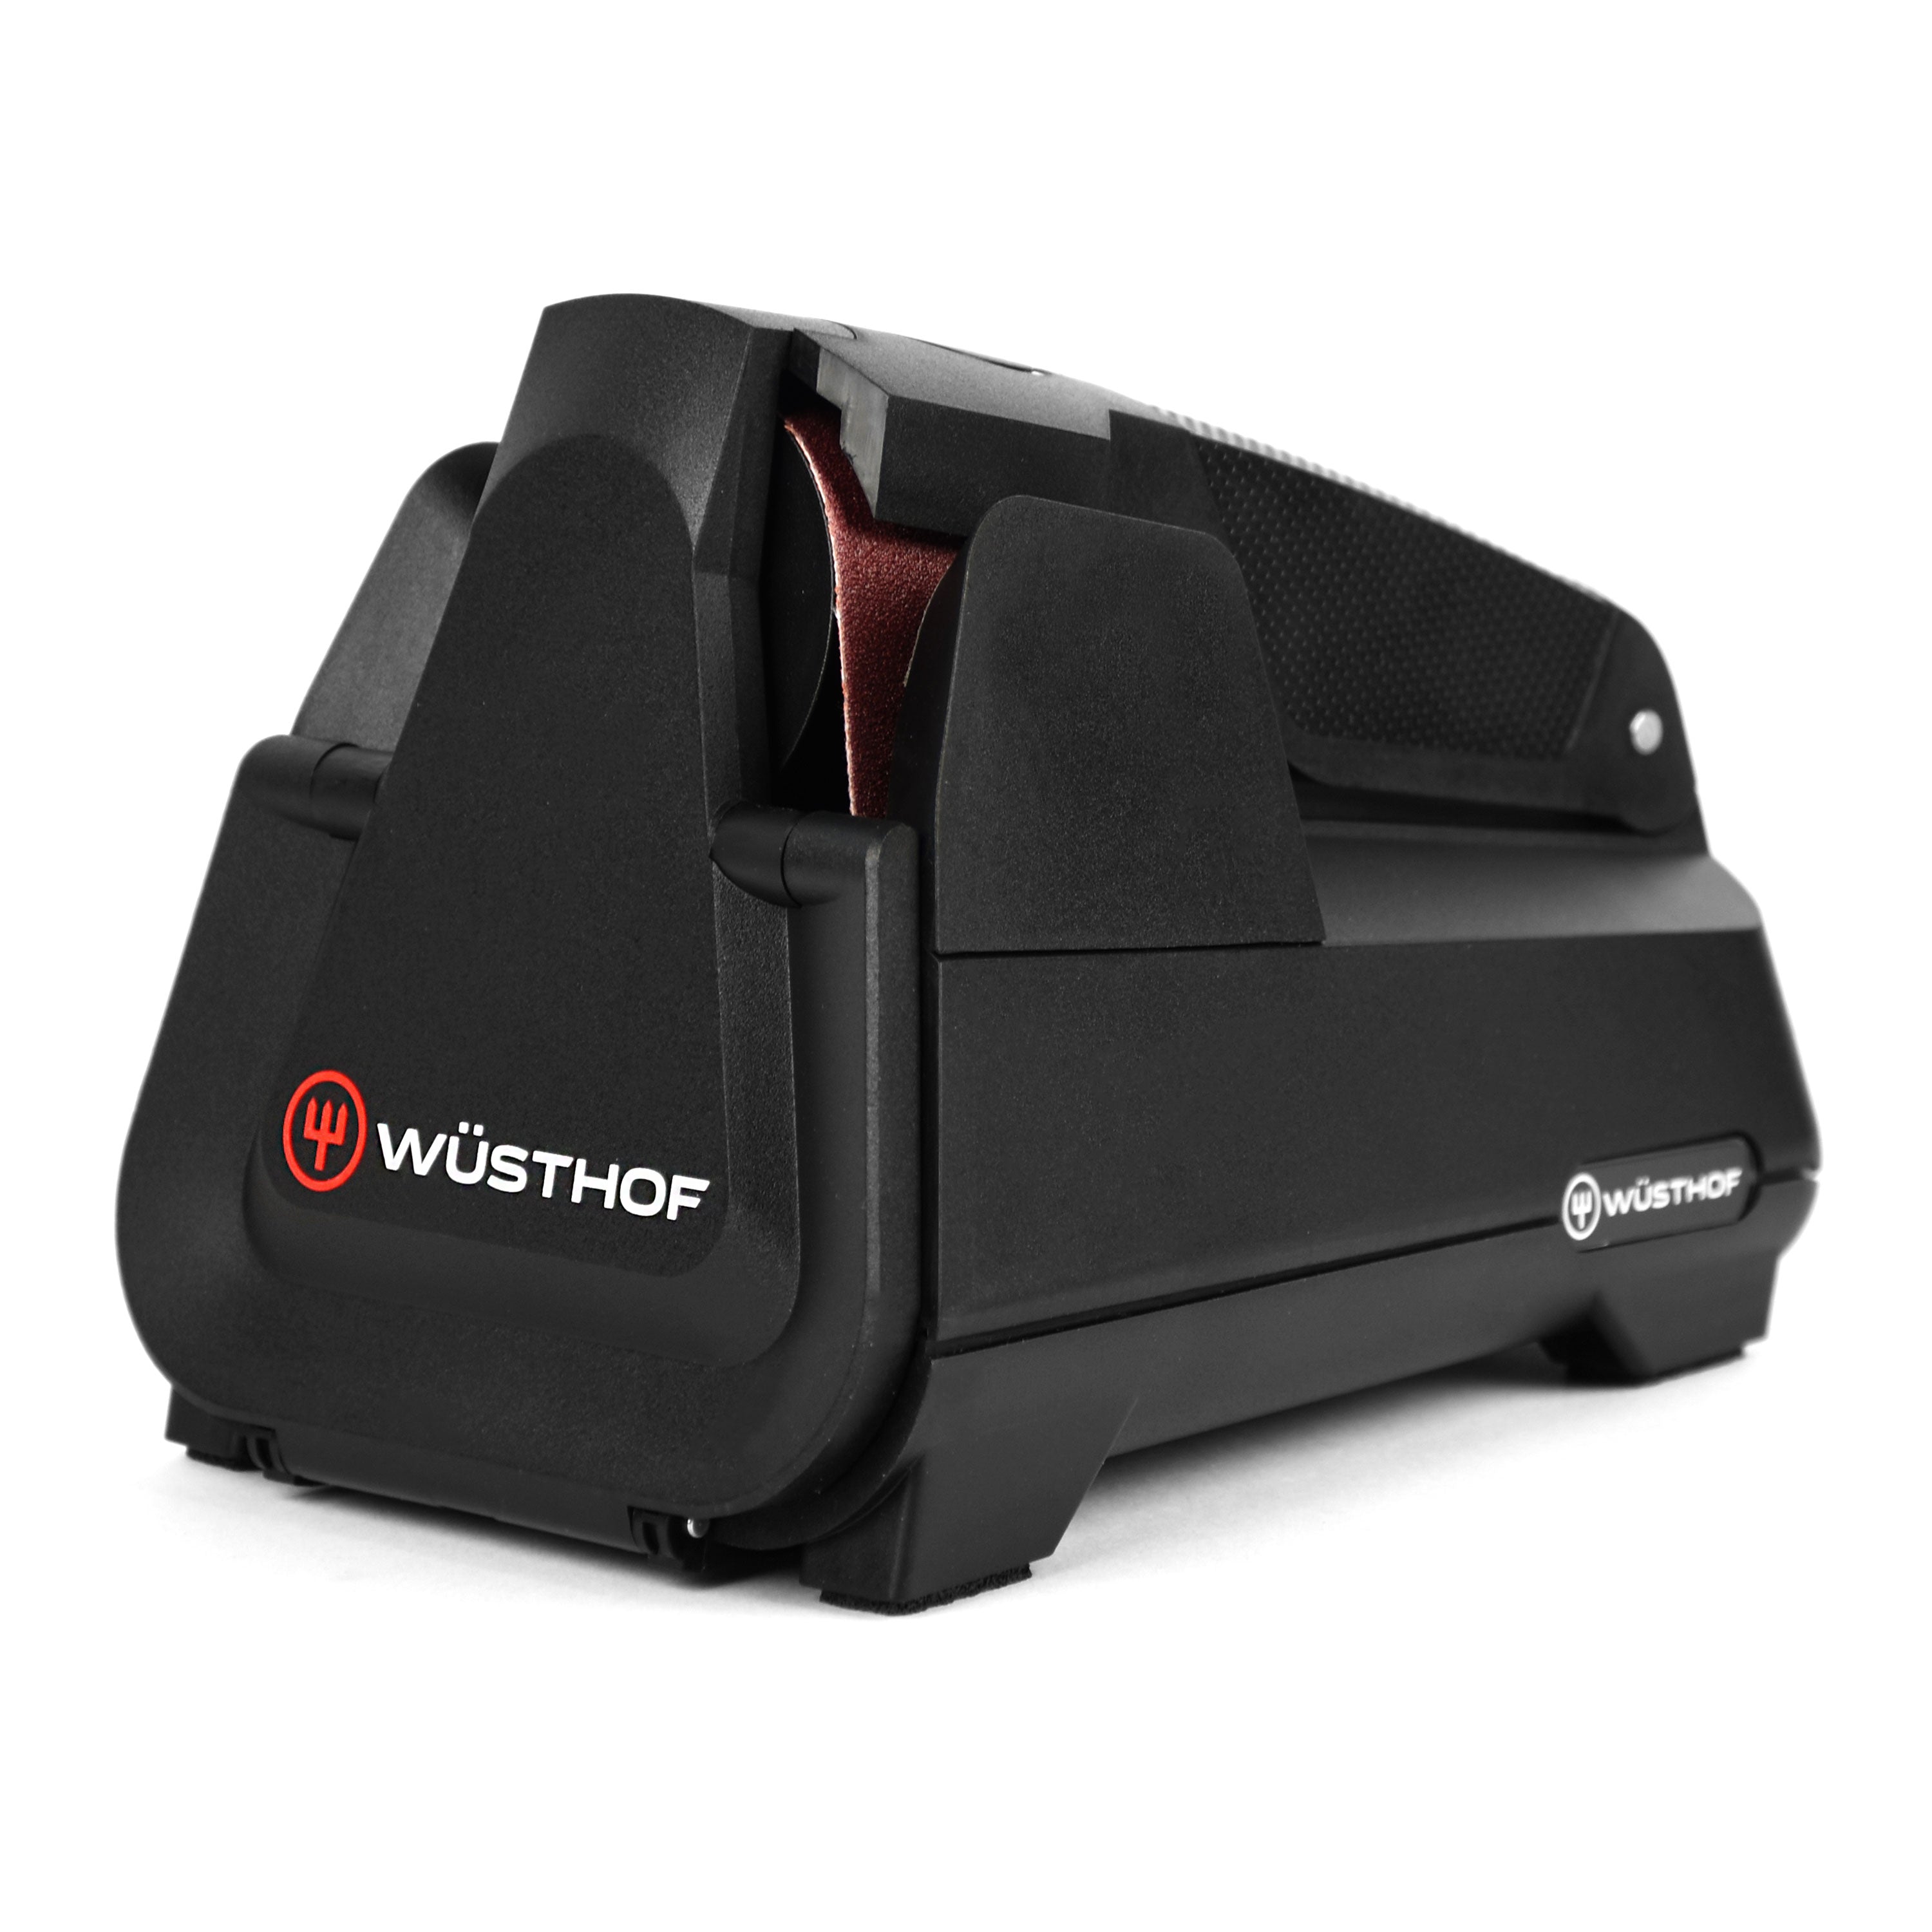 Wusthof Electric Knife Sharpener - Easy Edge Black – Cutlery and More